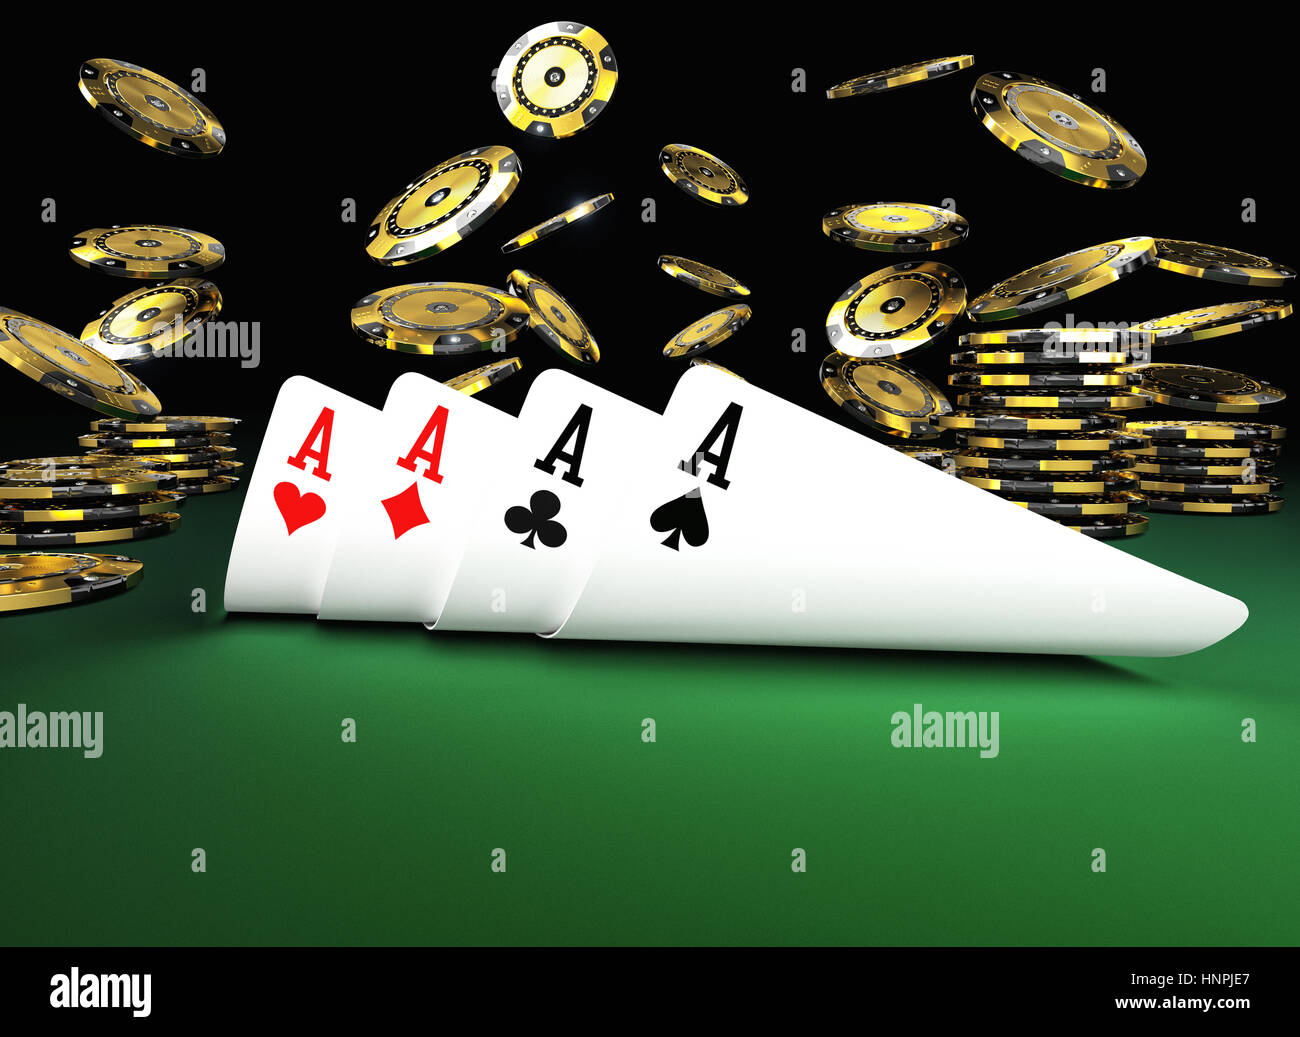 poker card on green table 3d rendering image Stock Photo